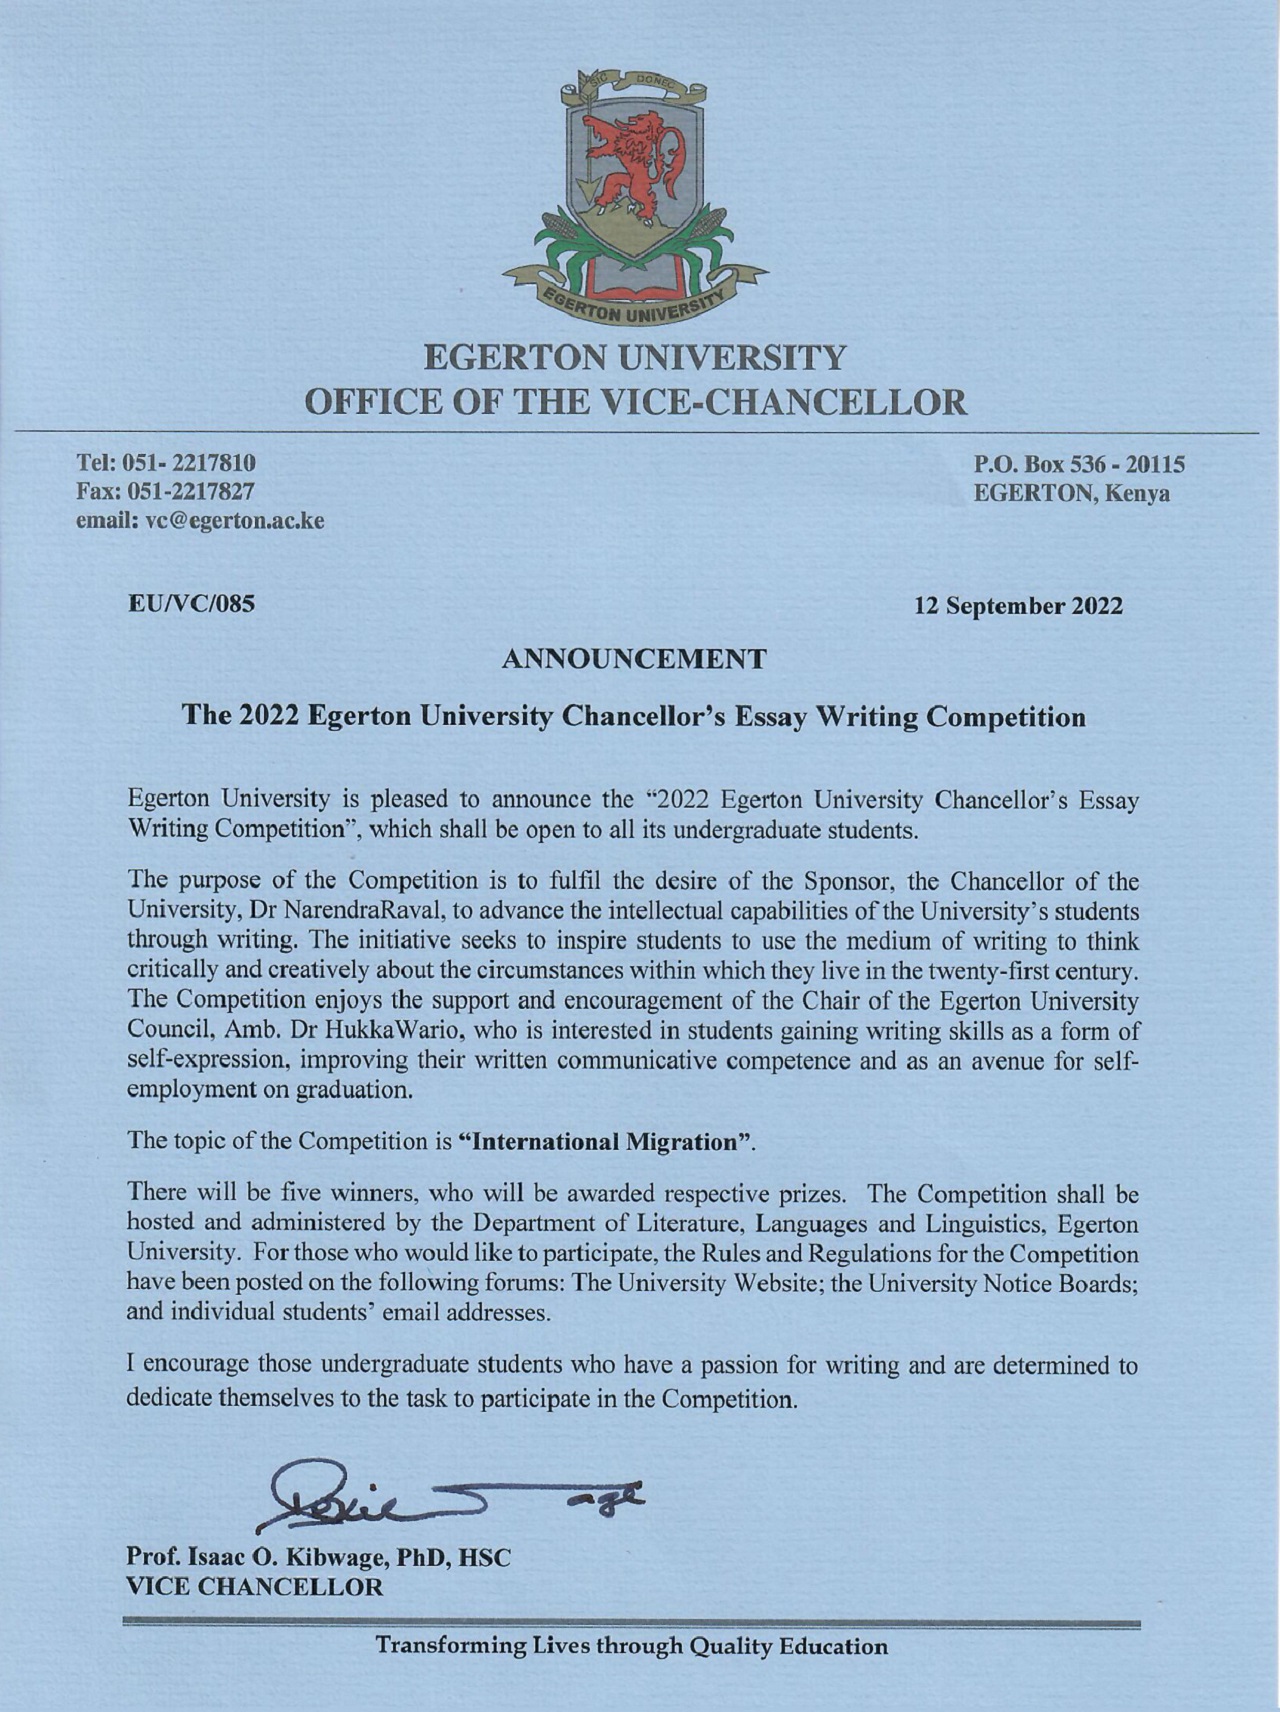 VC APPROVAL LETTER FOR ESSAY COMPETITION